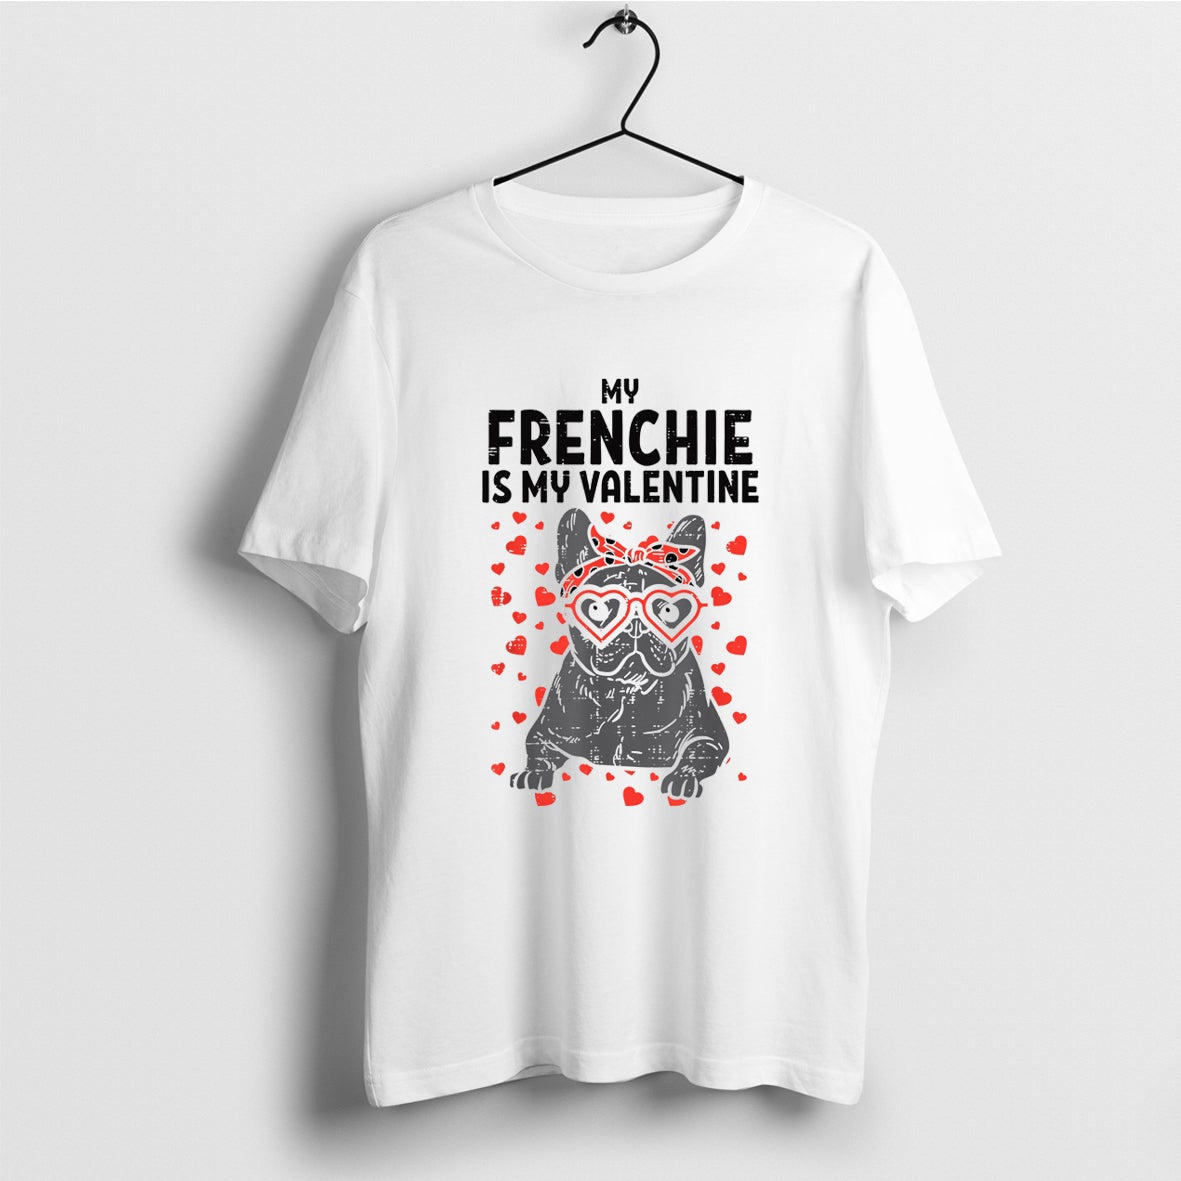 Frenchie Is My Valentine T-Shirt, French Bulldog Valentine Shirt, Valentines Frenchie Shirt, Anti Valentines Day Tee